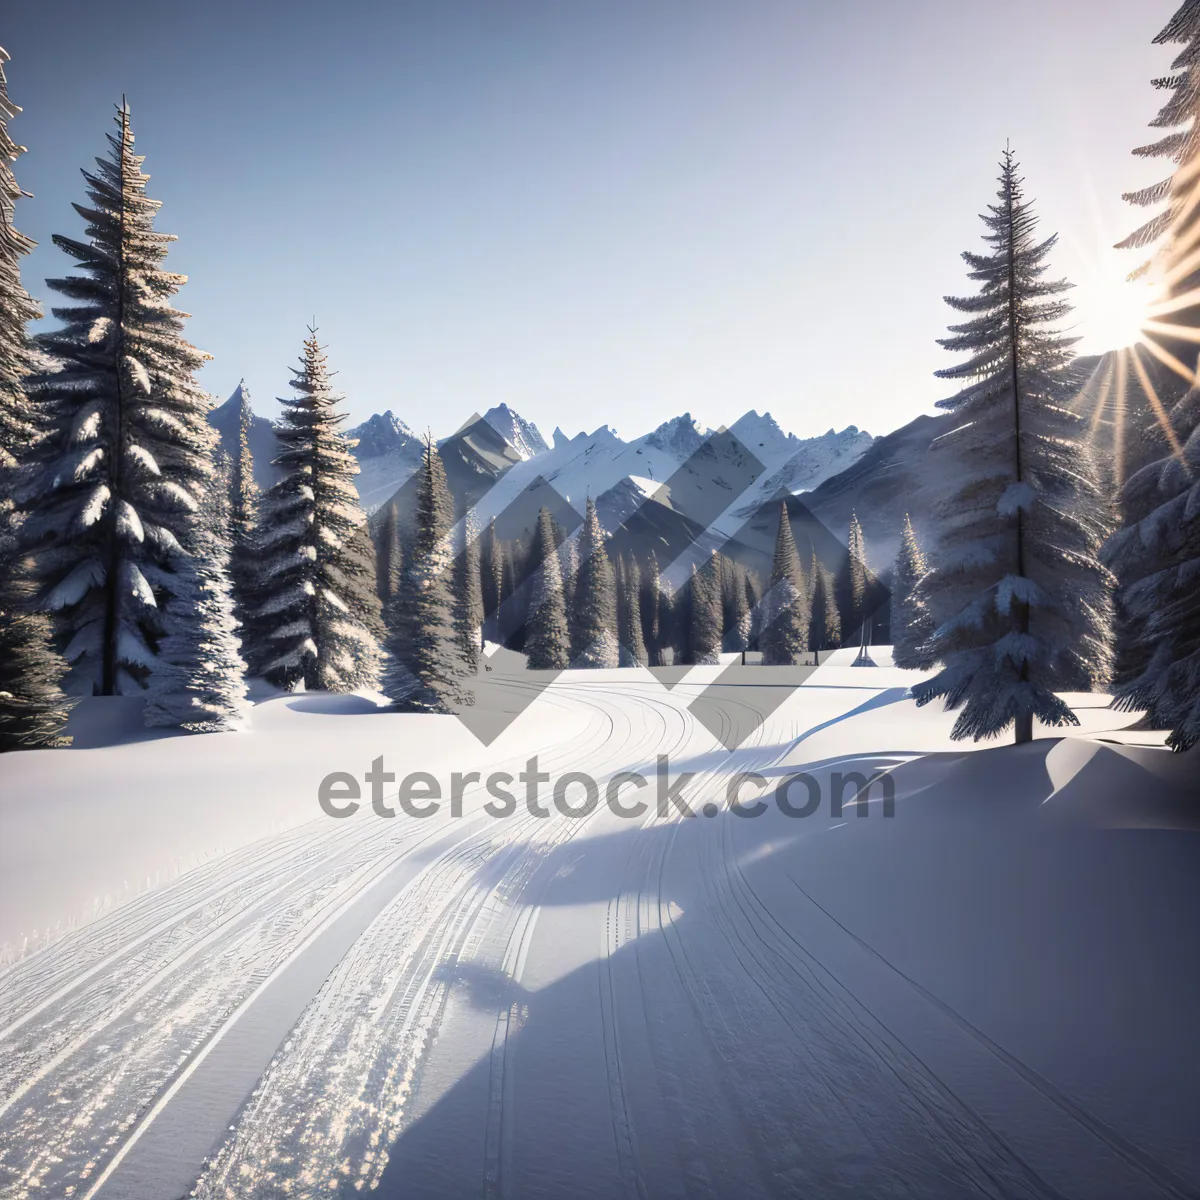 Picture of Snowy Evergreen Mountain Landscape